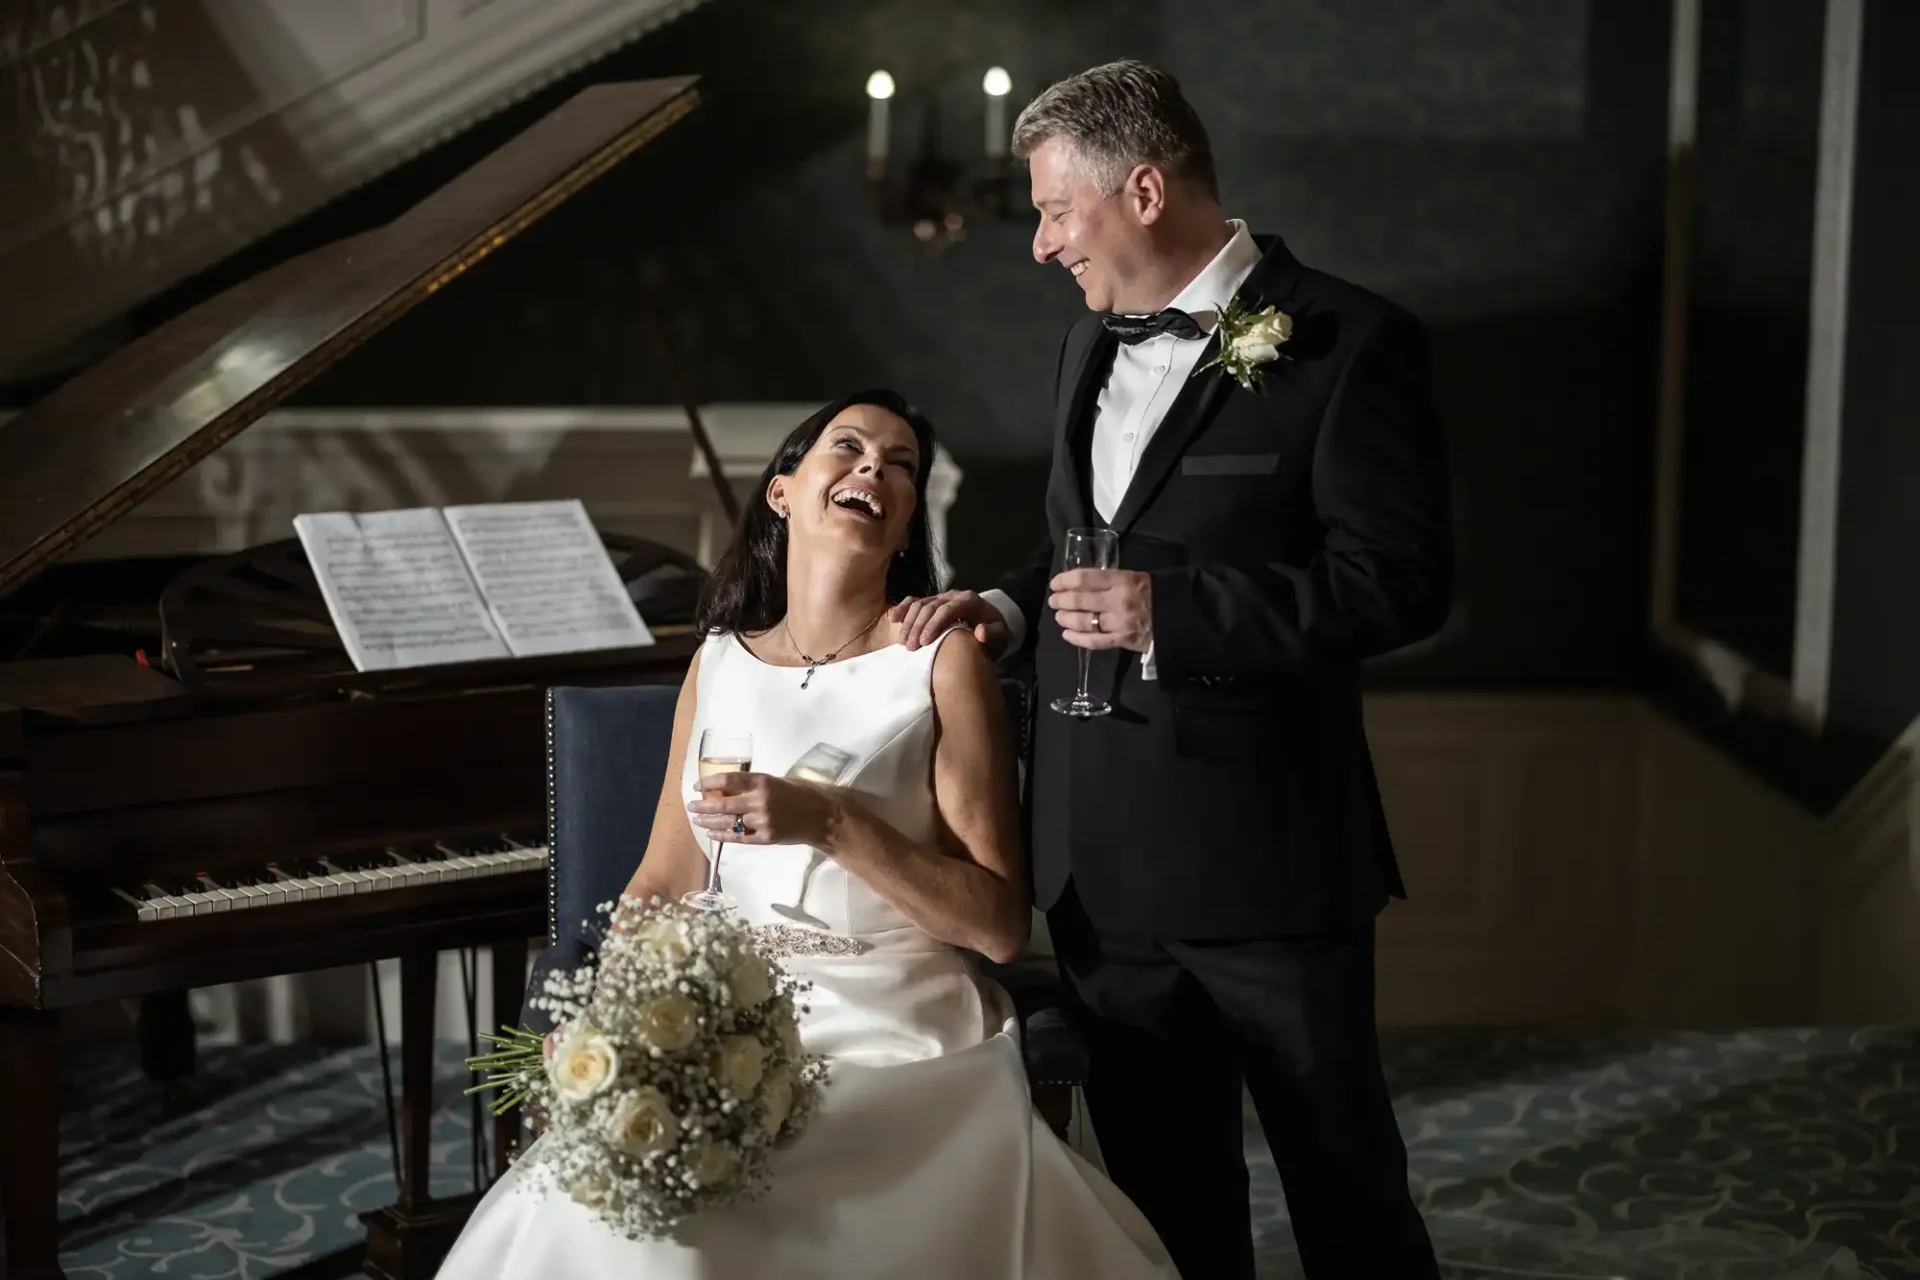 A bride and groom laughing together, holding drinks, beside a grand piano in an elegant room.